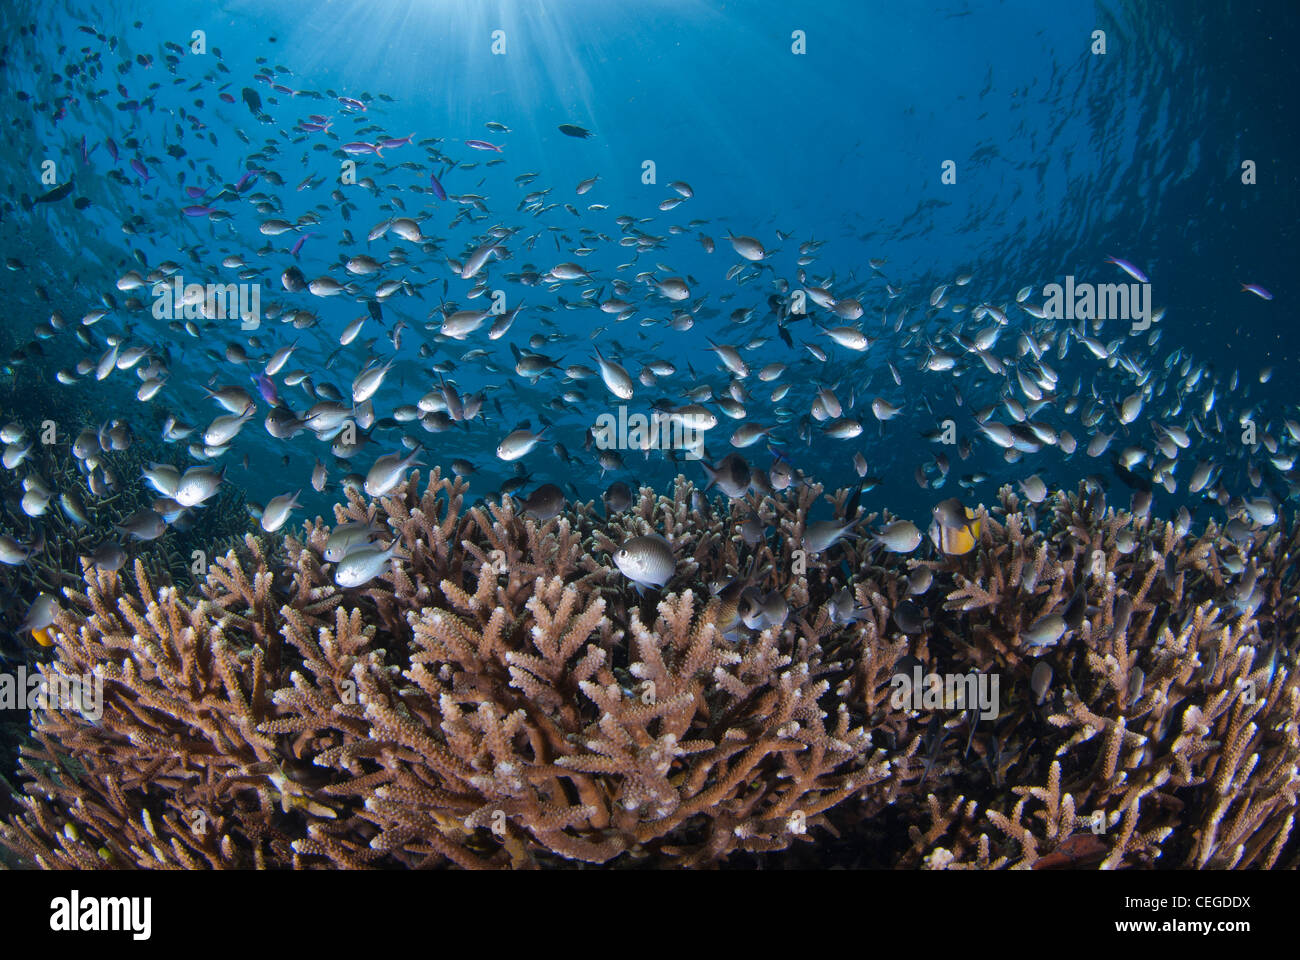 A large group of Damselfish lives in the acropora hard coral on the top reef of Bunaken Island, Indonesia Stock Photo